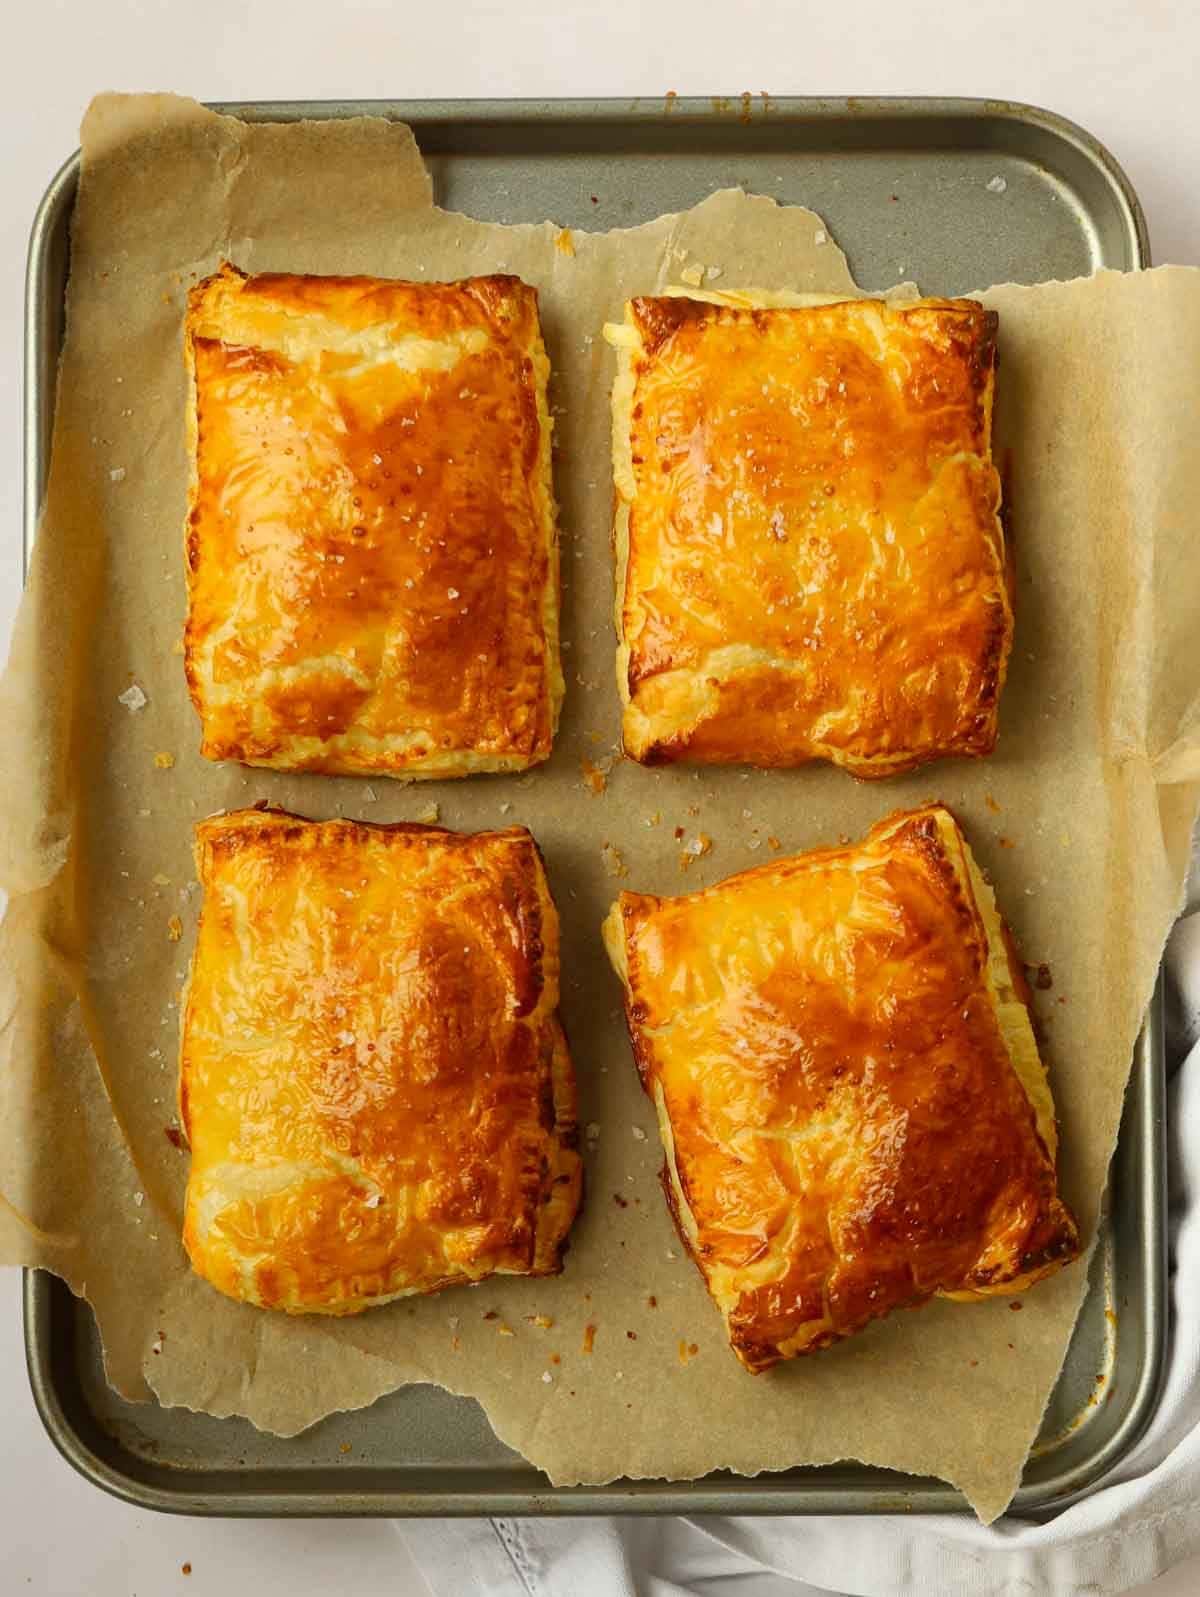 Four cheese and onion pasties on a baking tray straight out of the oven.